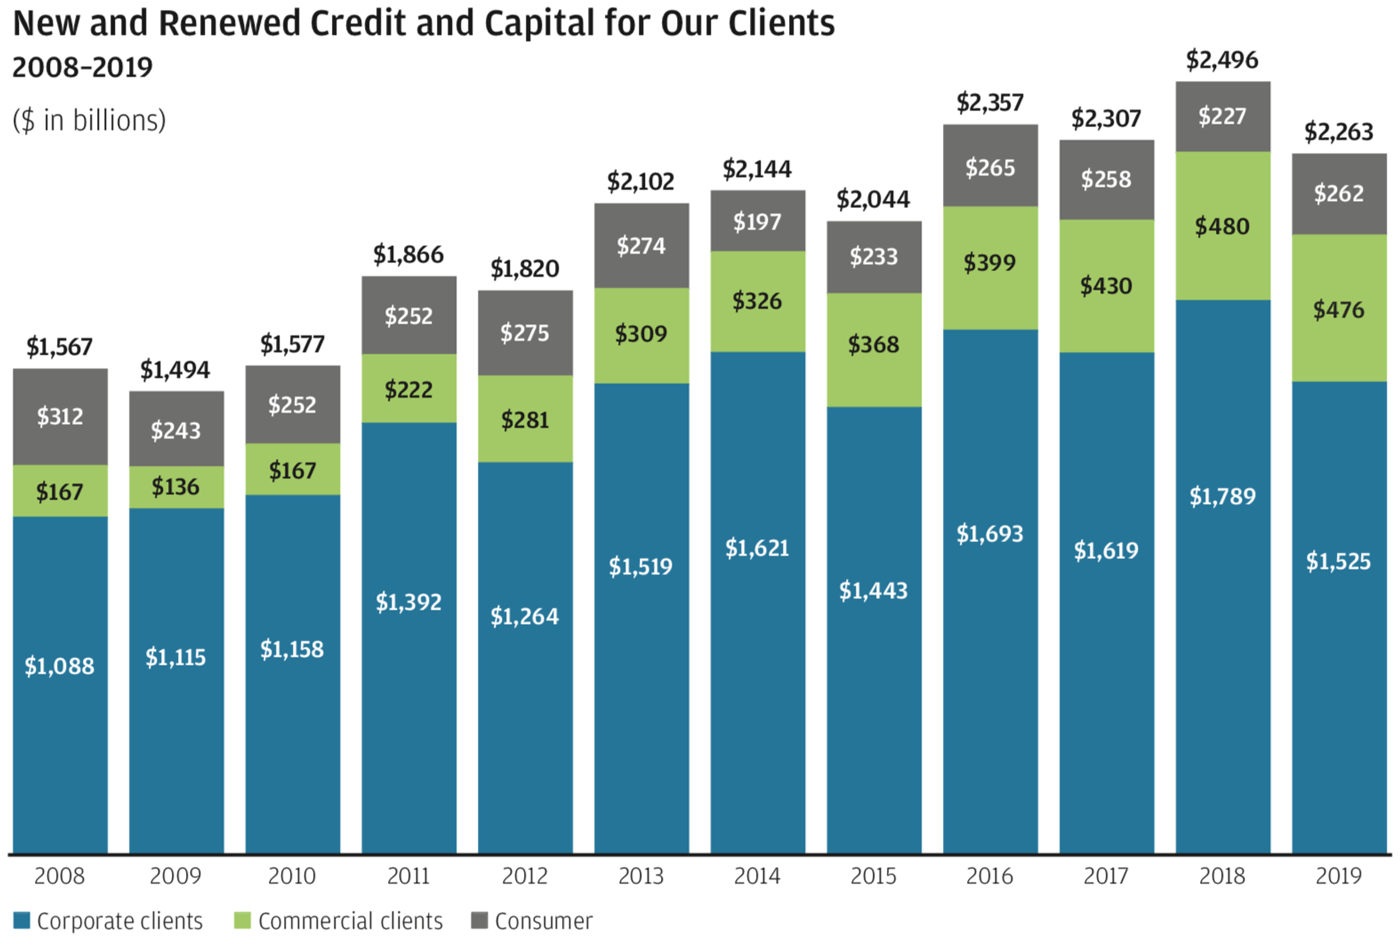 New and Renewed Credit and Capital for Our Clients at December 31